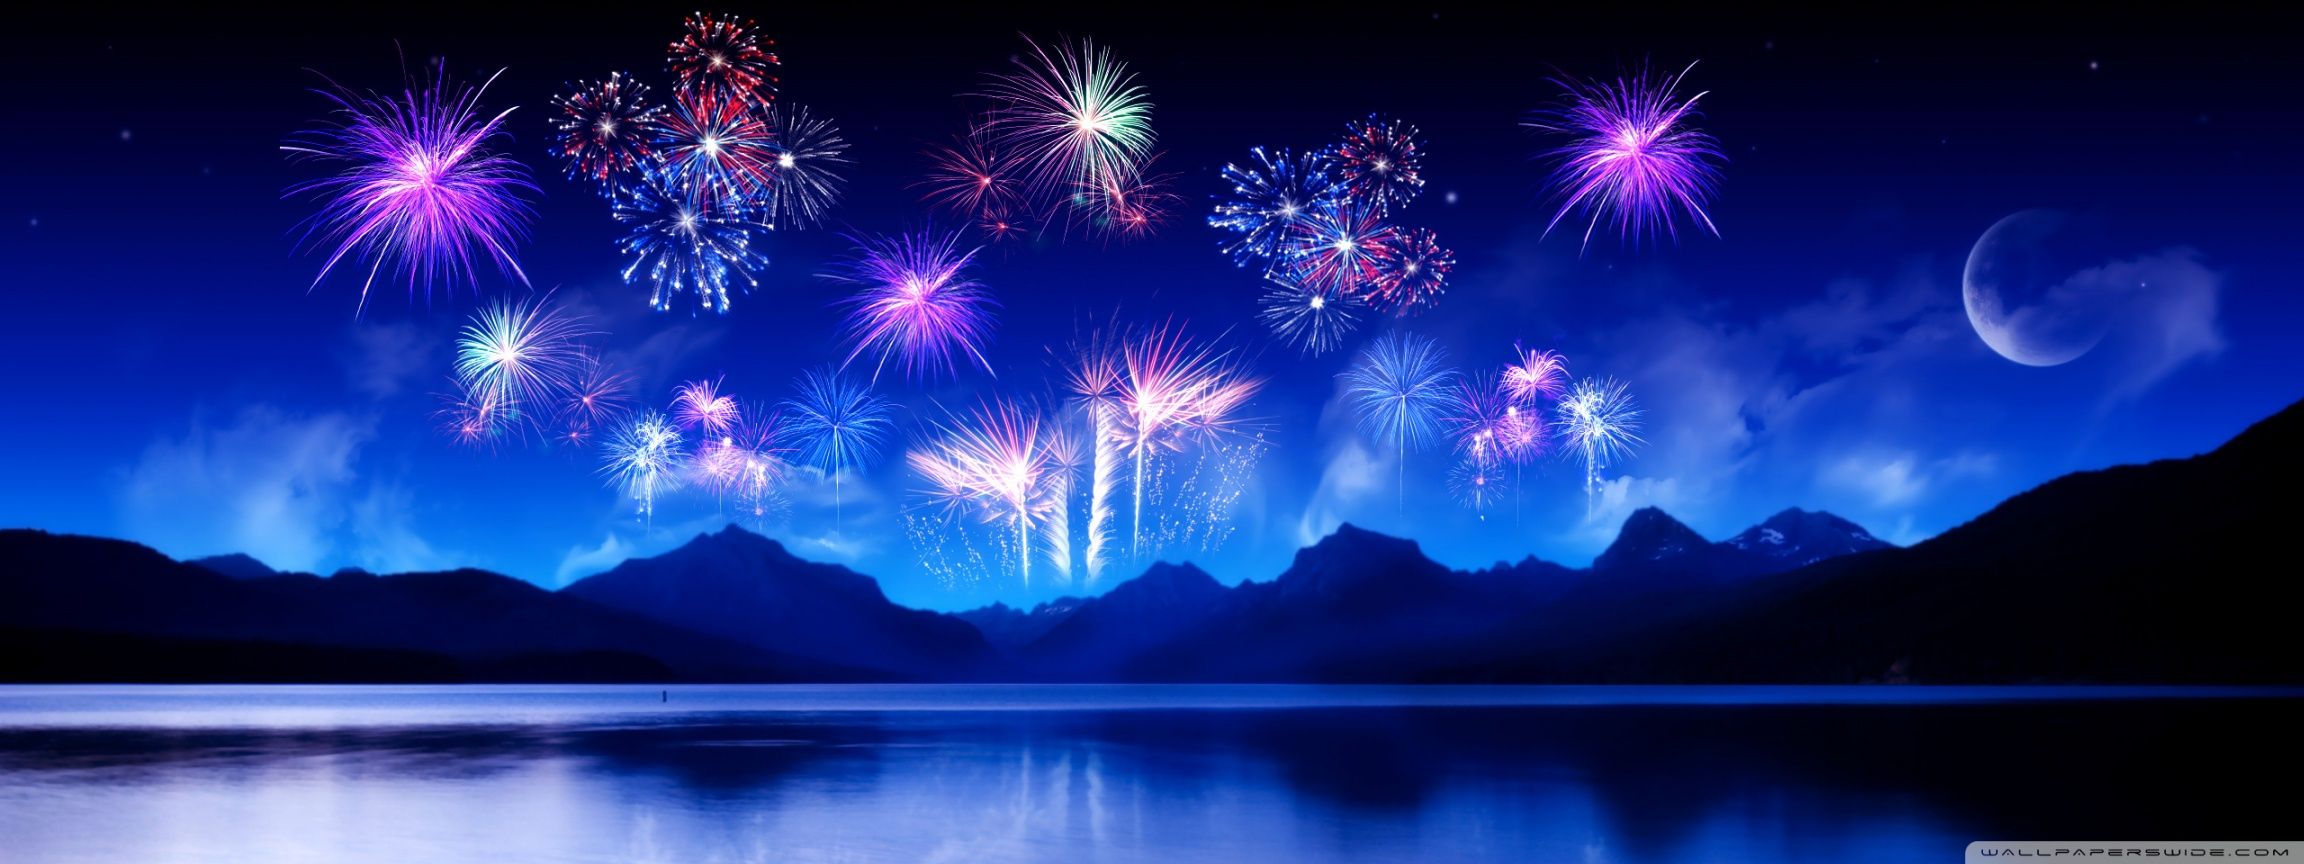 Fireworks in the night sky wallpaper 1920x1080 - New Year